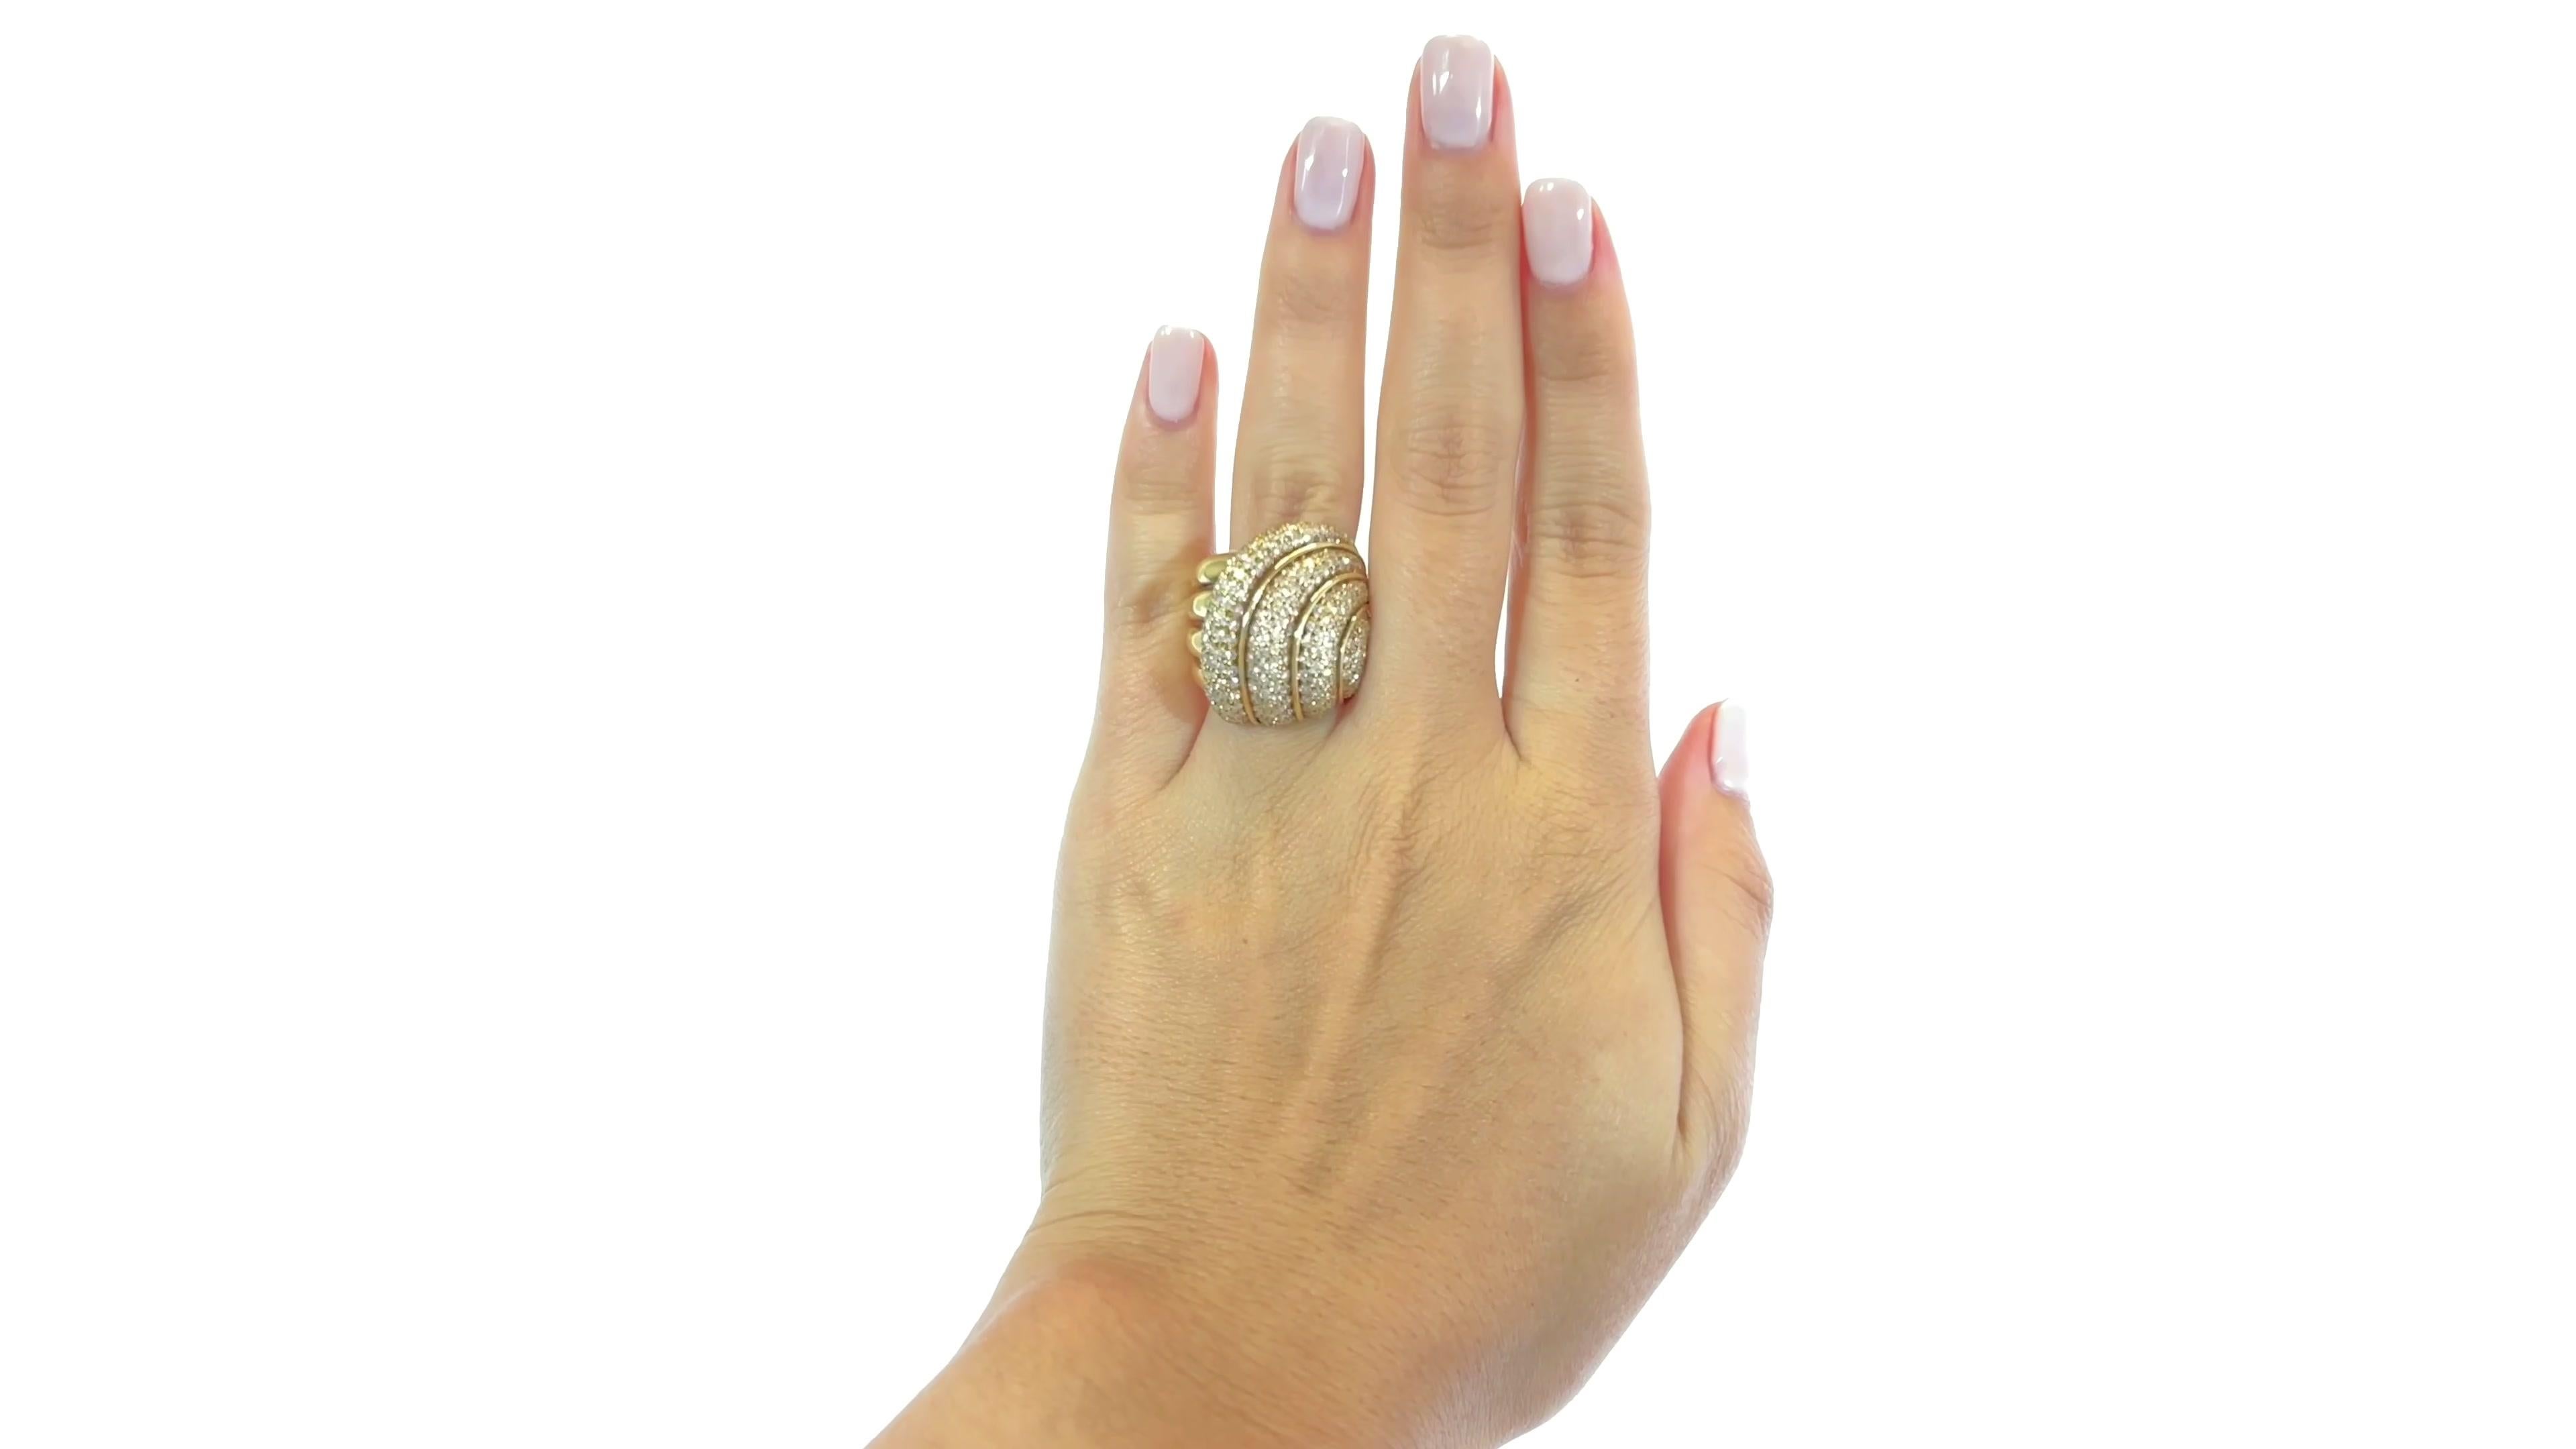 Vintage Henry Dunay Diamond Gold Cocktail Ring. This ring is adorned with many Round Brilliant Cut diamonds approximately 3.00 carats total, D-E color, VVS clarity. Signed Dunay, with purity mark. Circa 1980s. Size 6 1/2.

About The Piece: When it